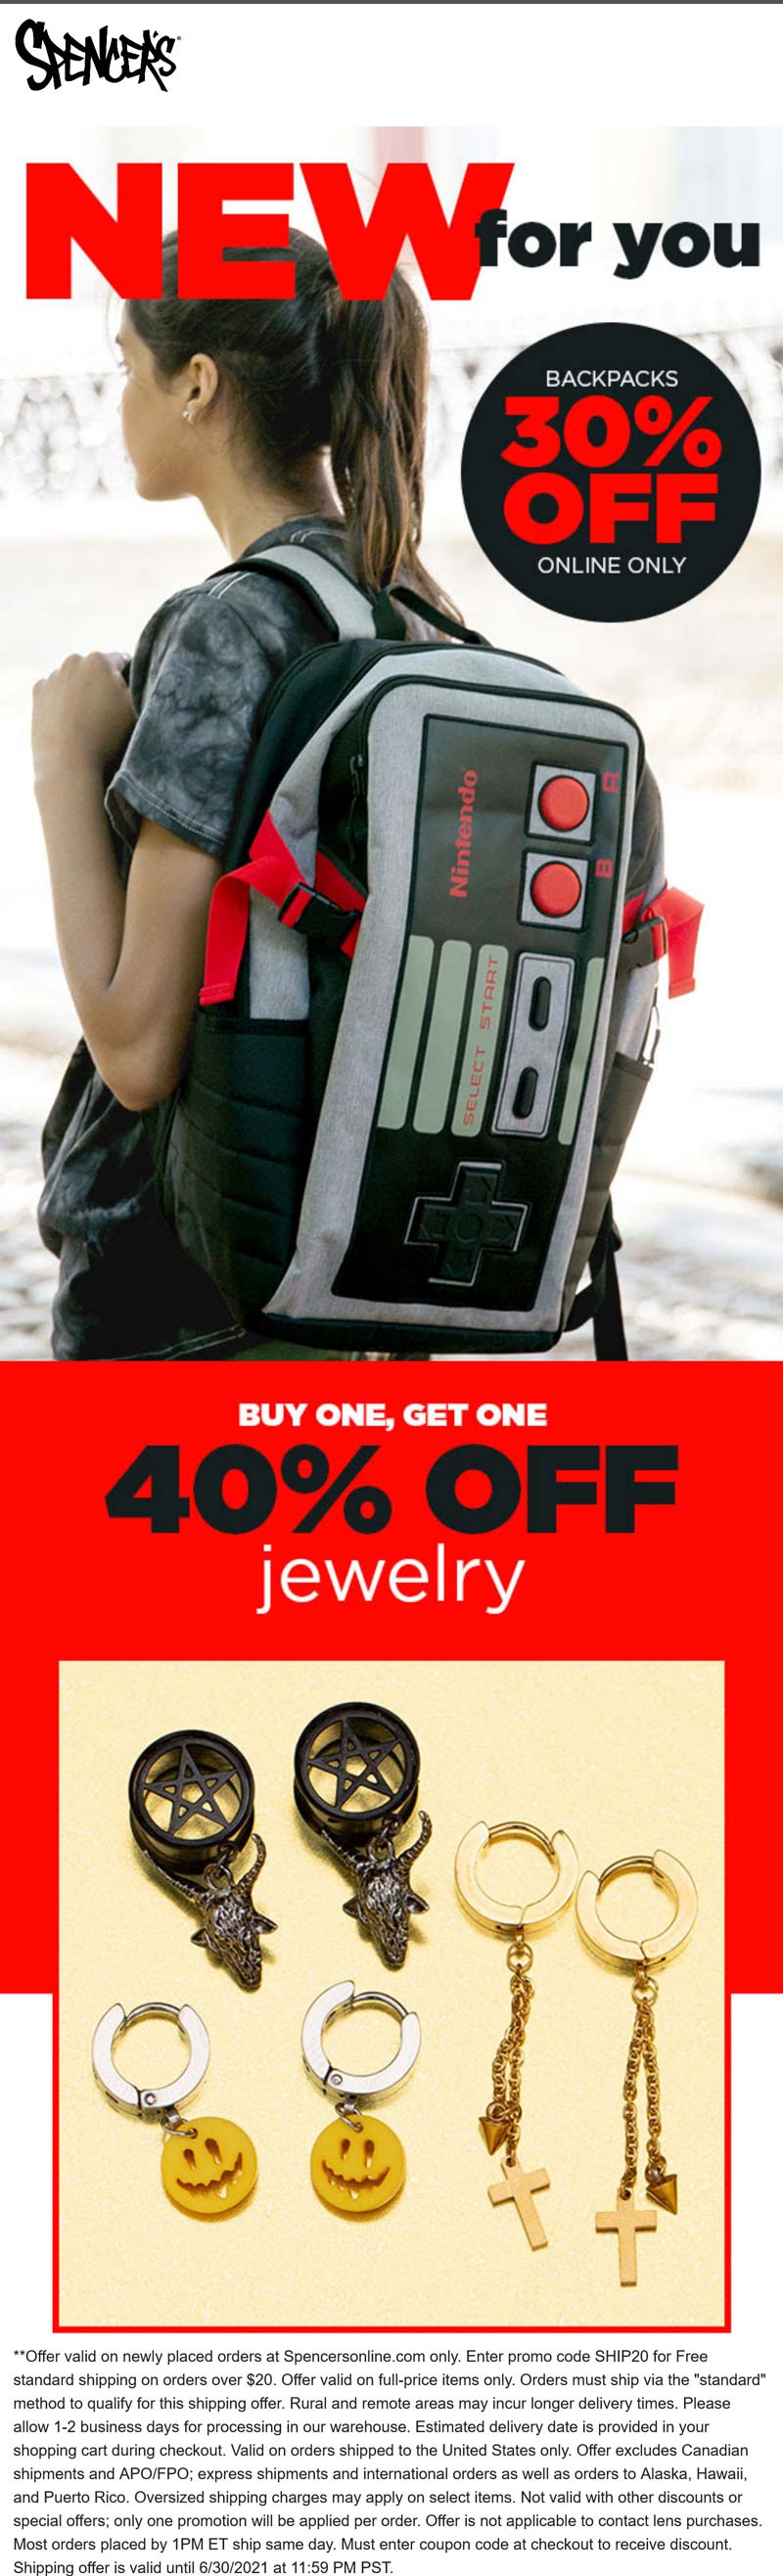 30 off backpacks online at Spencers spencers The Coupons App®